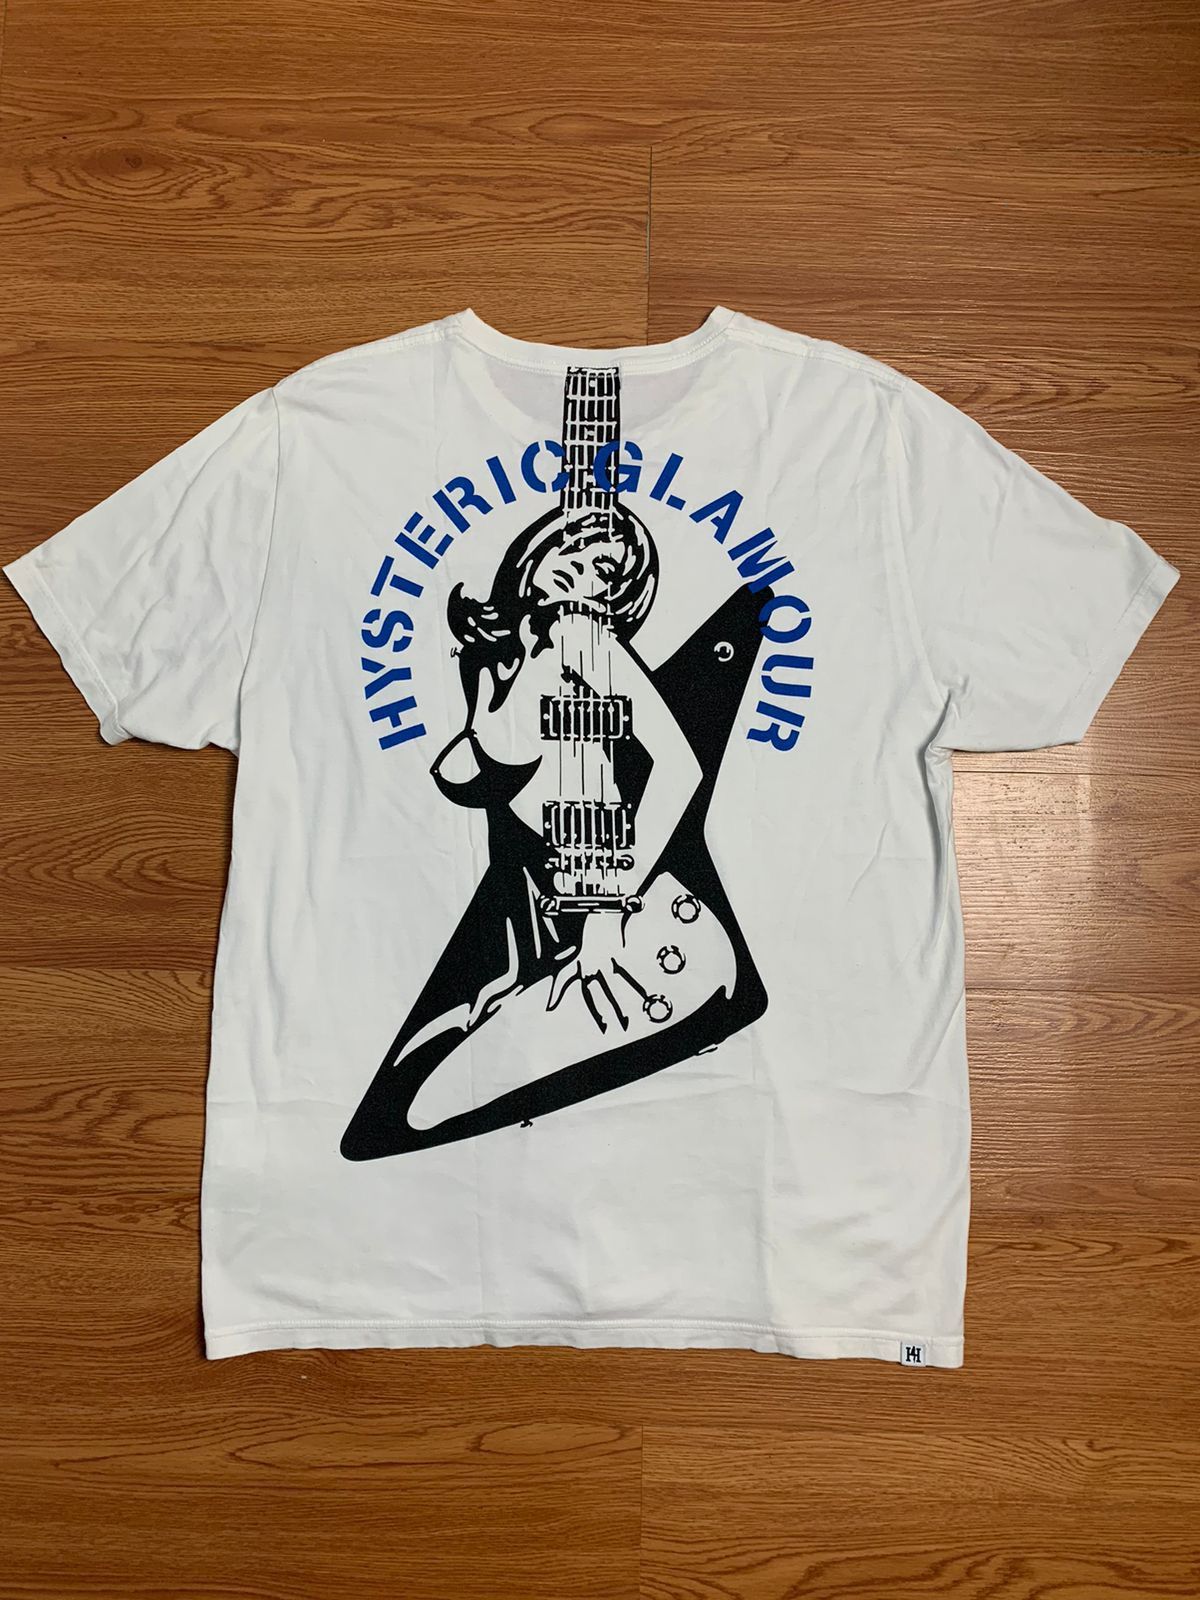 Archival Clothing Hysteric Glamour “Nude Guitar Girl” Shirt | Grailed